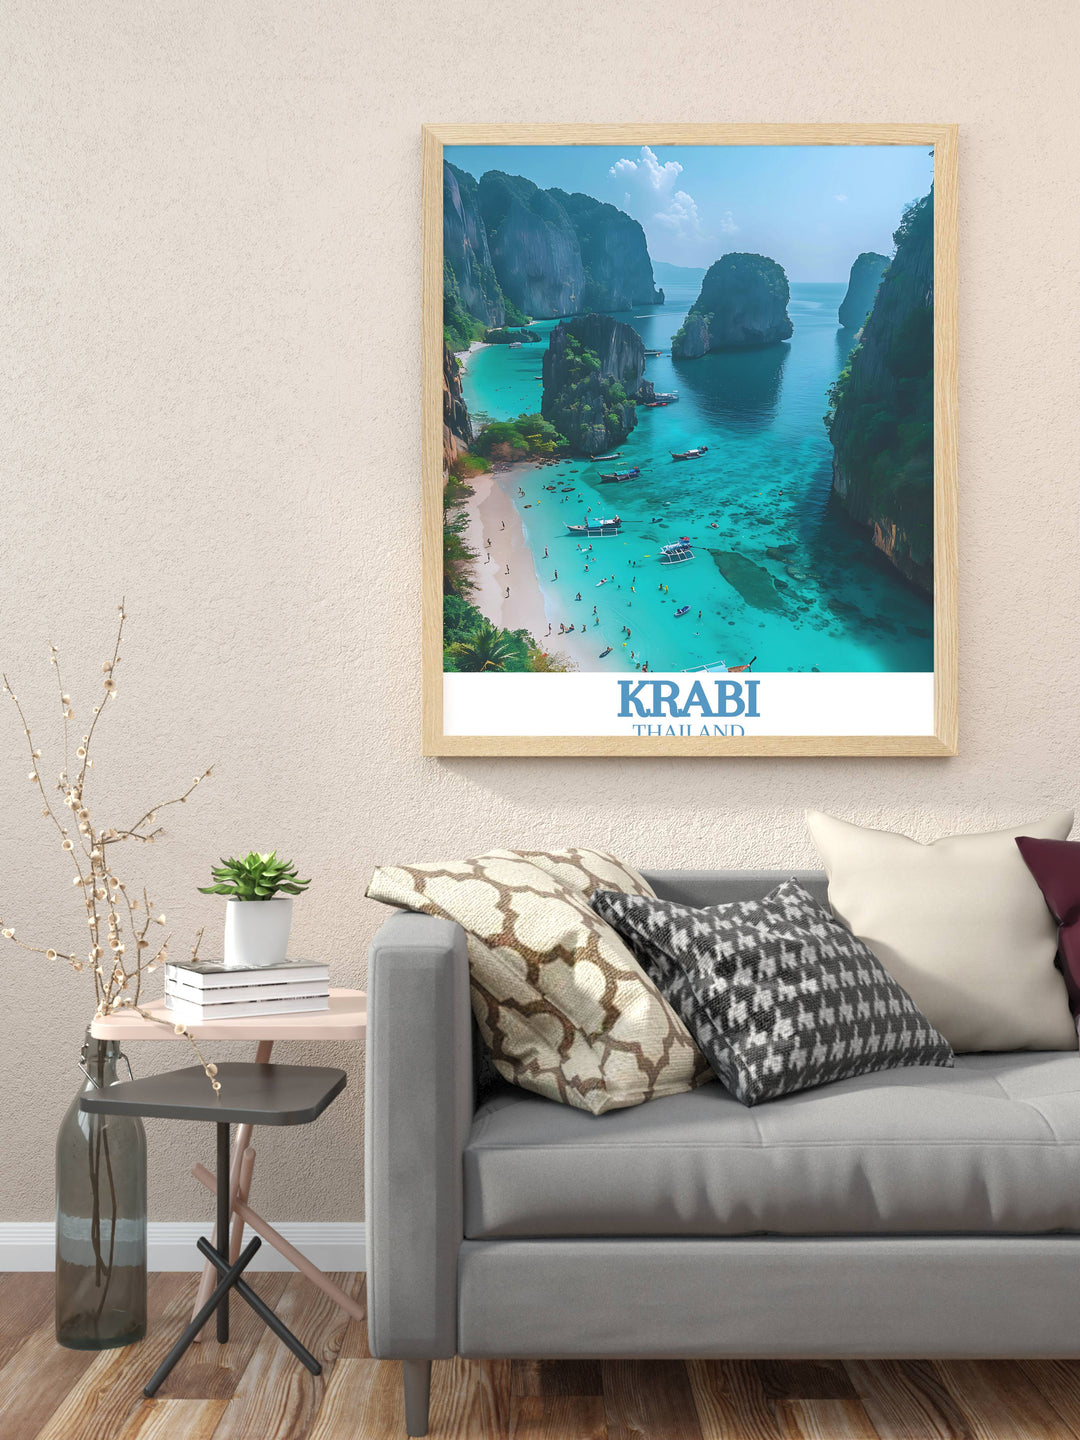 Transform your home decor with the vibrant colors and serene beauty of Krabi Island and Railay Beach captured in this beautiful wall art print ideal for adding a touch of tropical paradise and making a memorable travel gift.